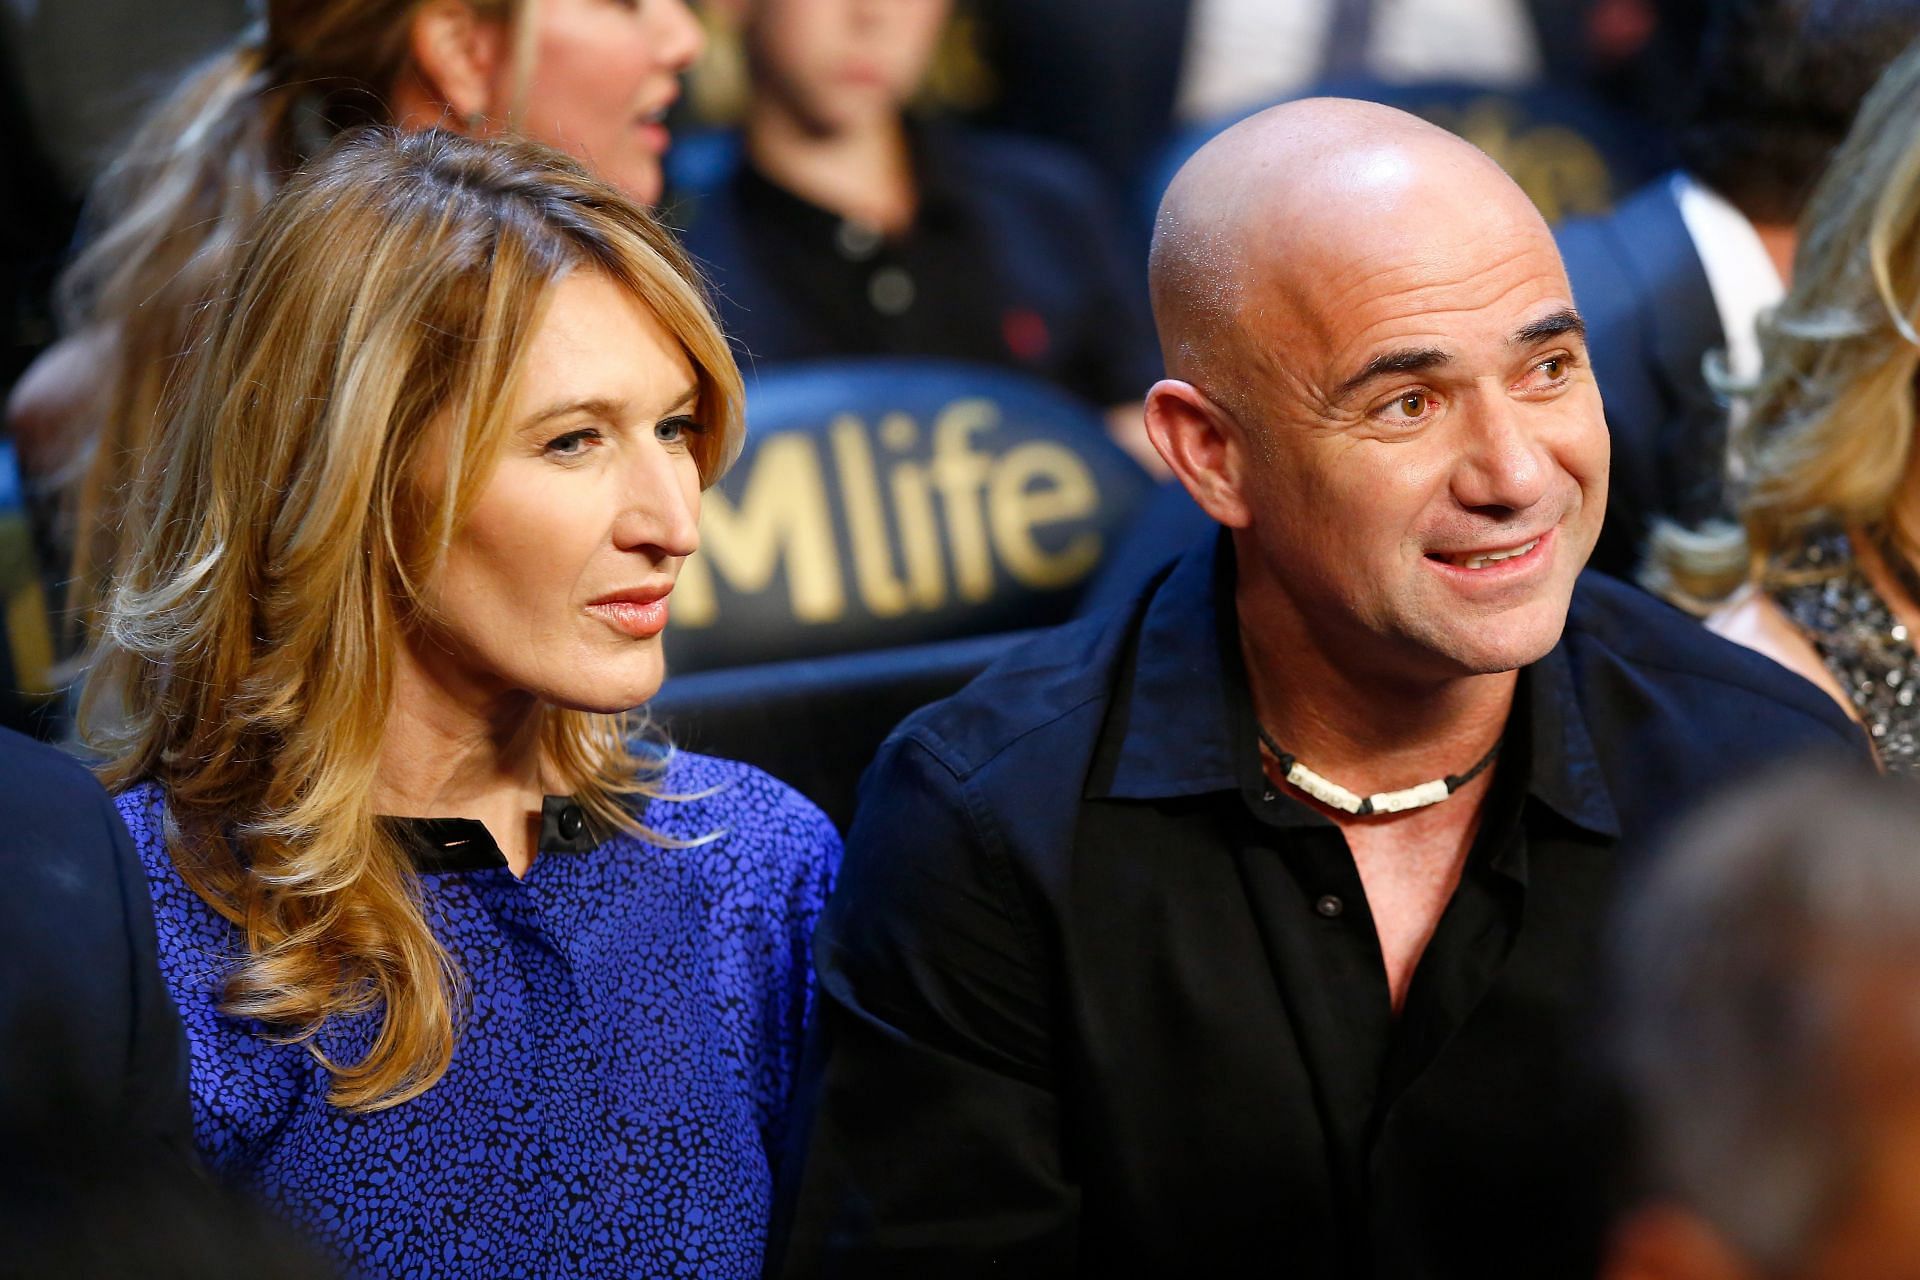 Andre Agassi (R) and his wife Steffi Graf